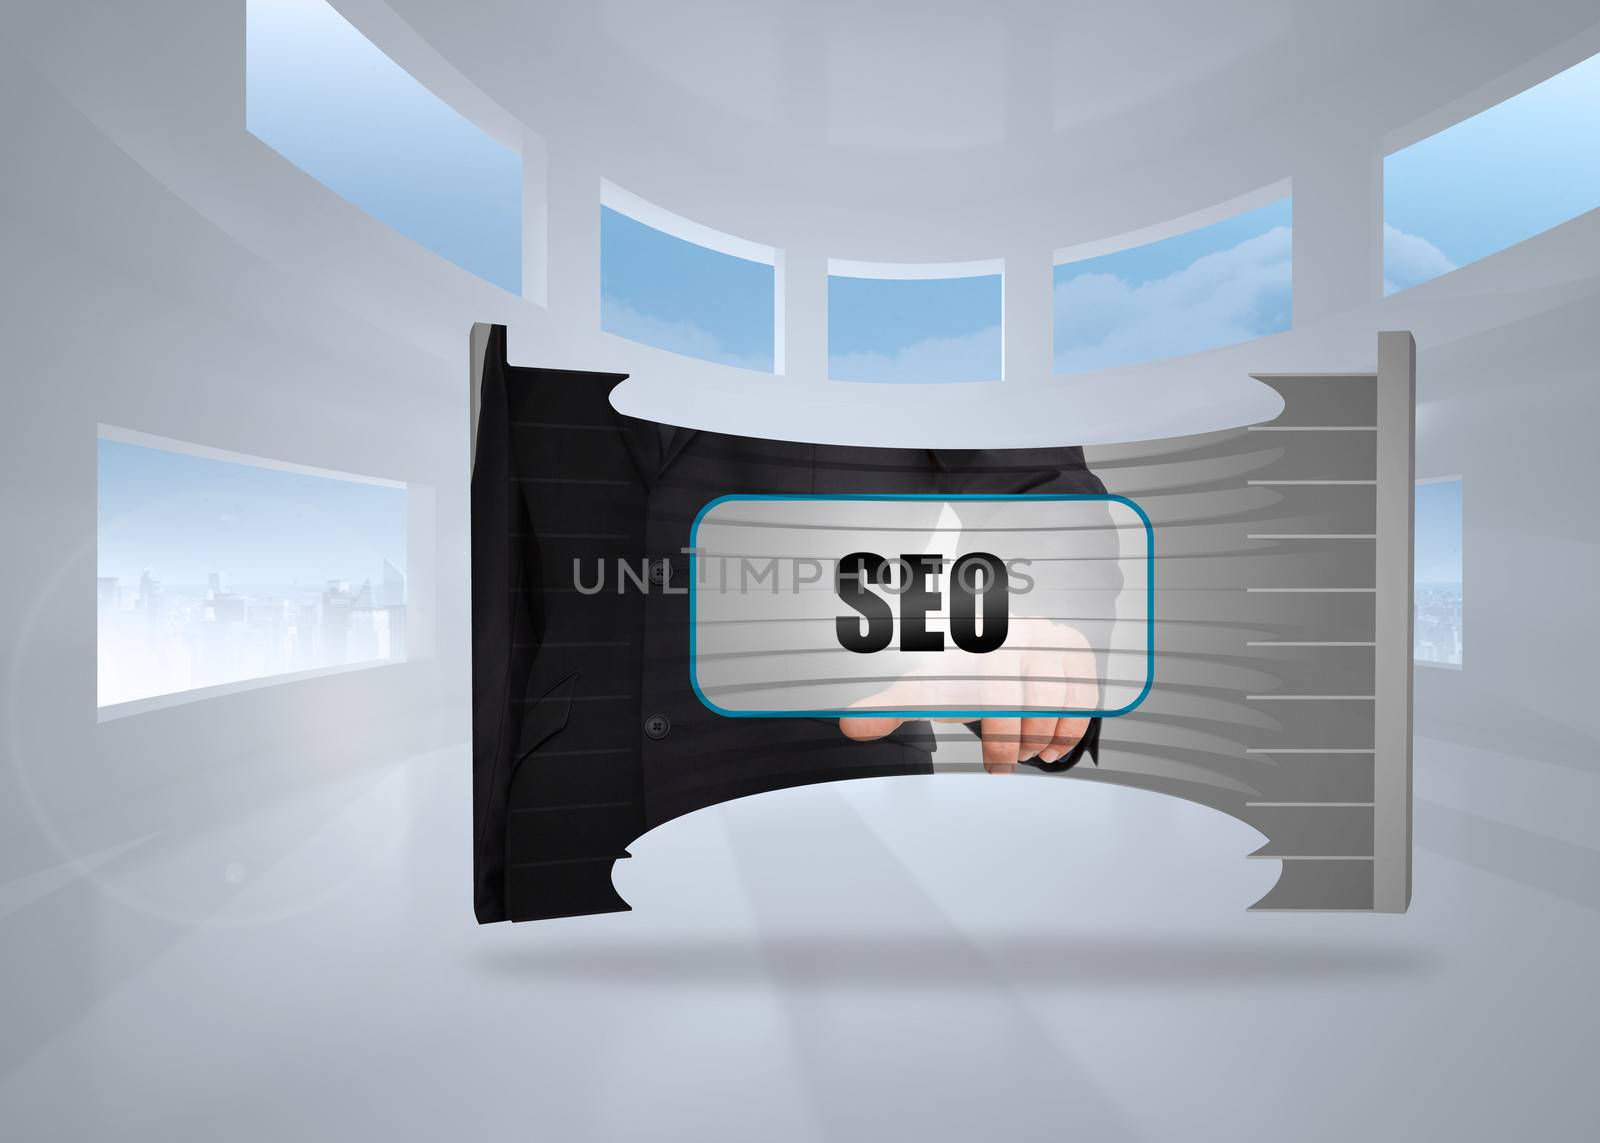 Seo banner on abstract screen against bright white room with windows